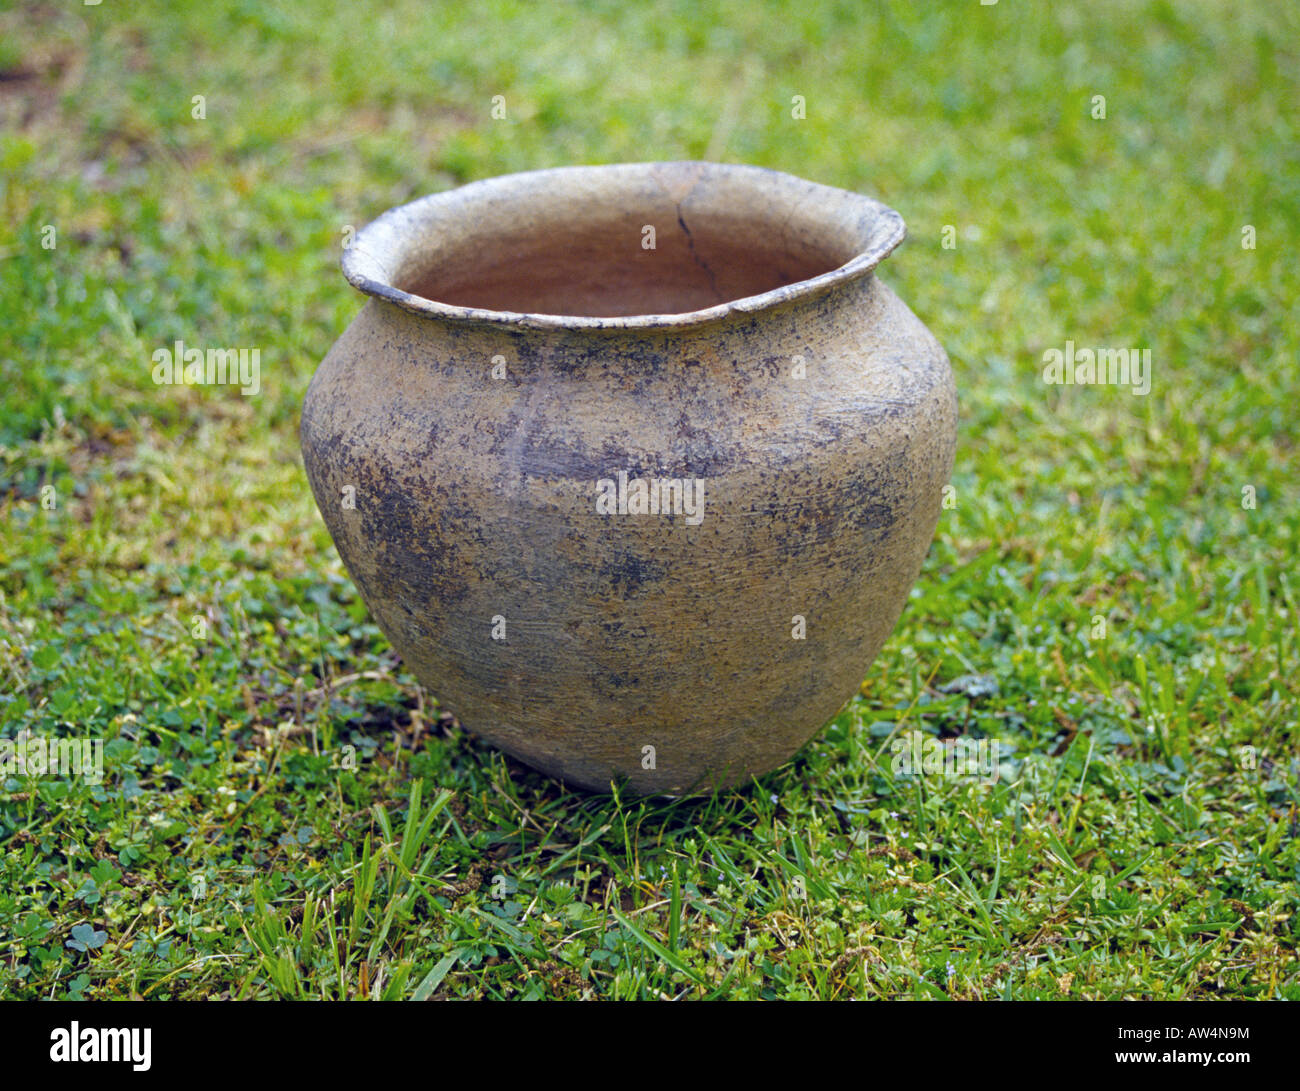 At Etowah Indian Mounds this is ceramic utility pottery from the Mississippian Culture of native americans Stock Photo